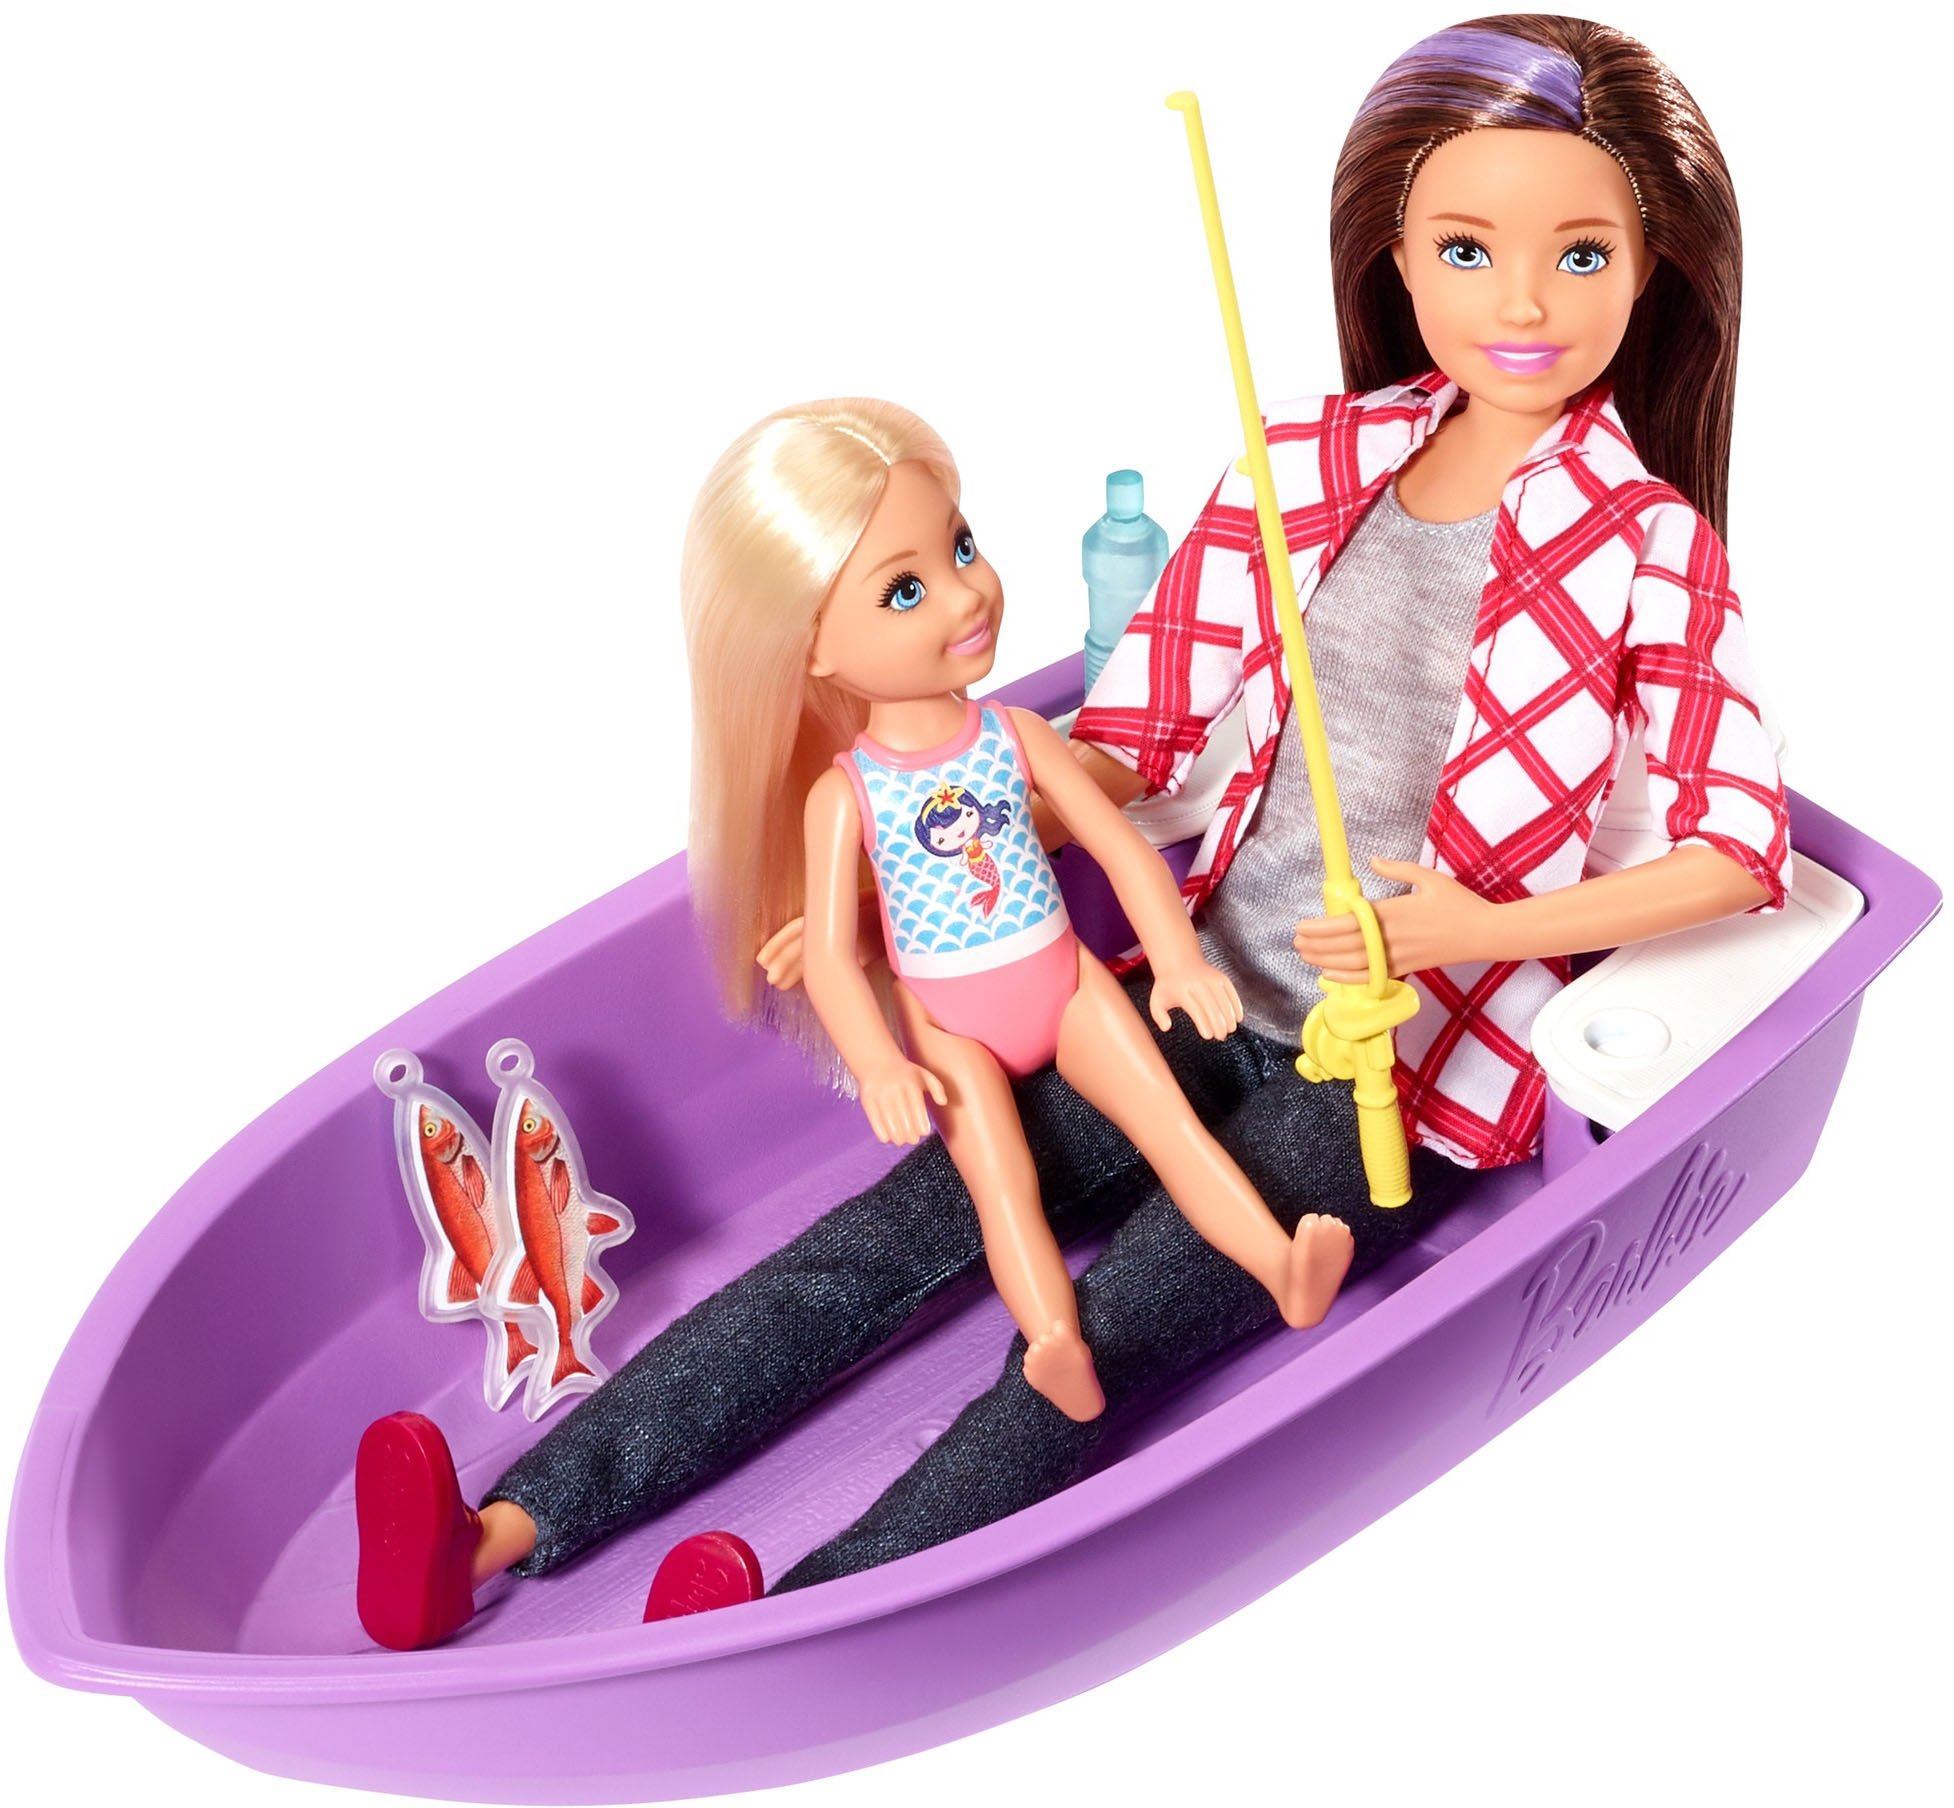 Just Play Barbie® Pet Camper Vehicle and Accessories Set